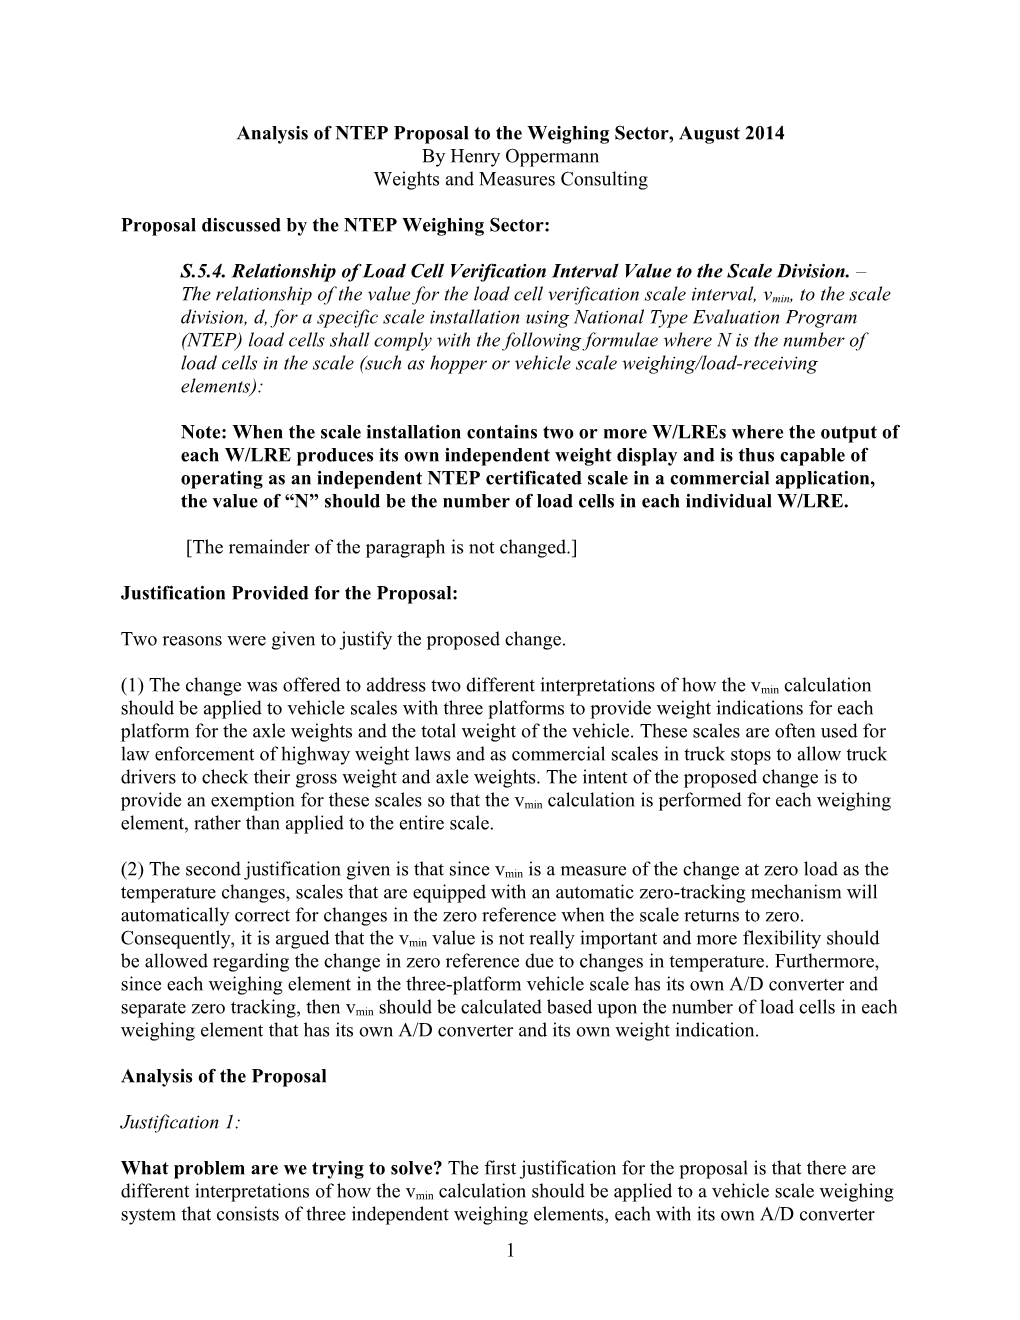 Analysis of NTEP Proposal to the Weighing Sector, August 2014